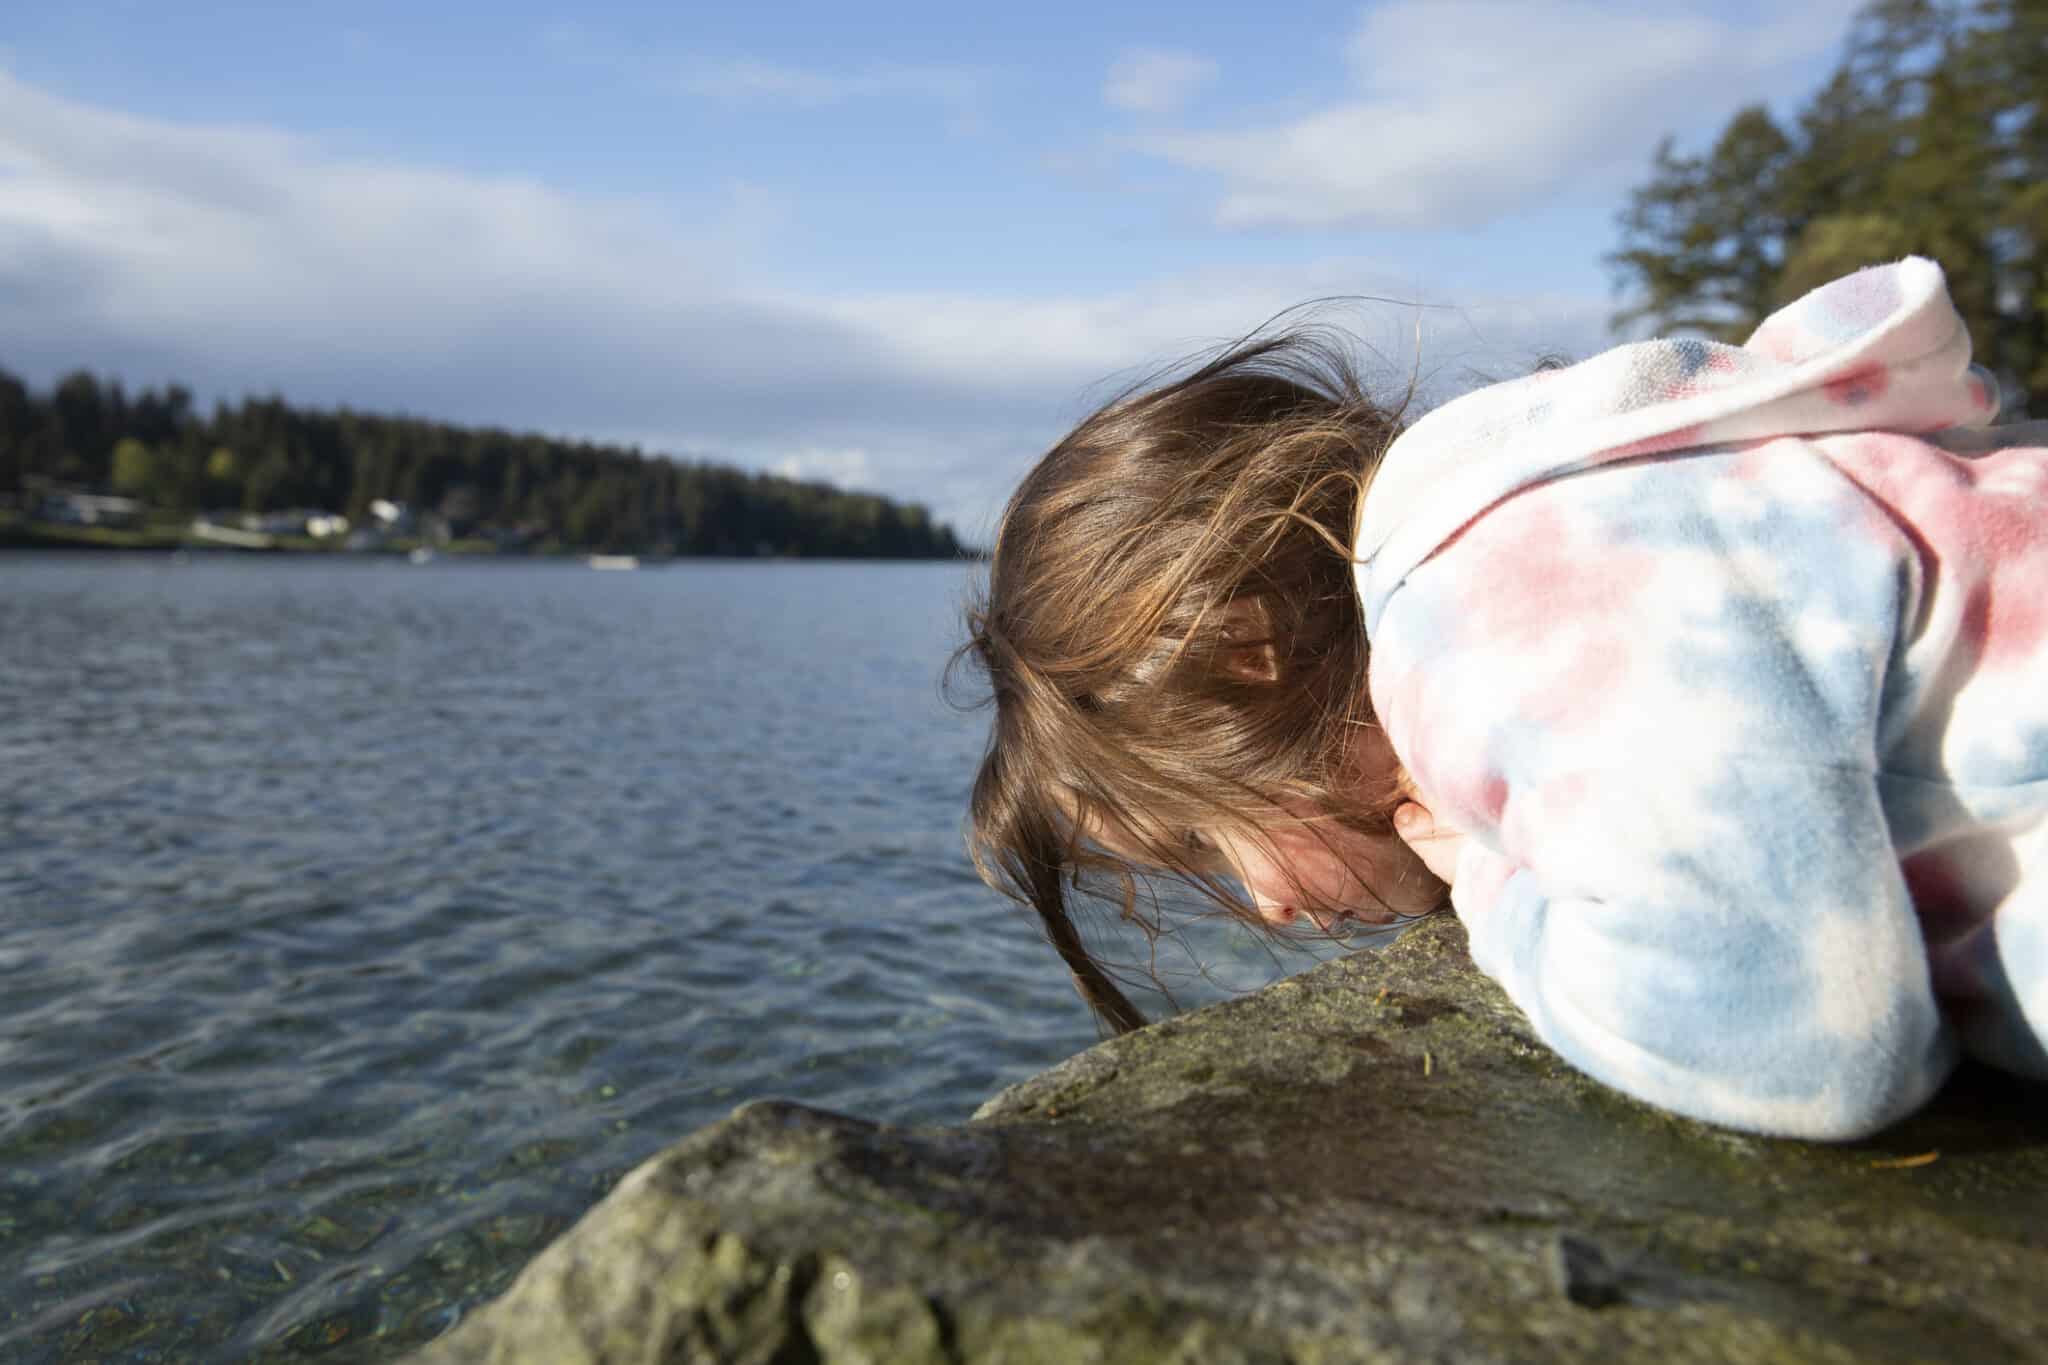 Toddler curiously looking over ledge into water searching for sea life